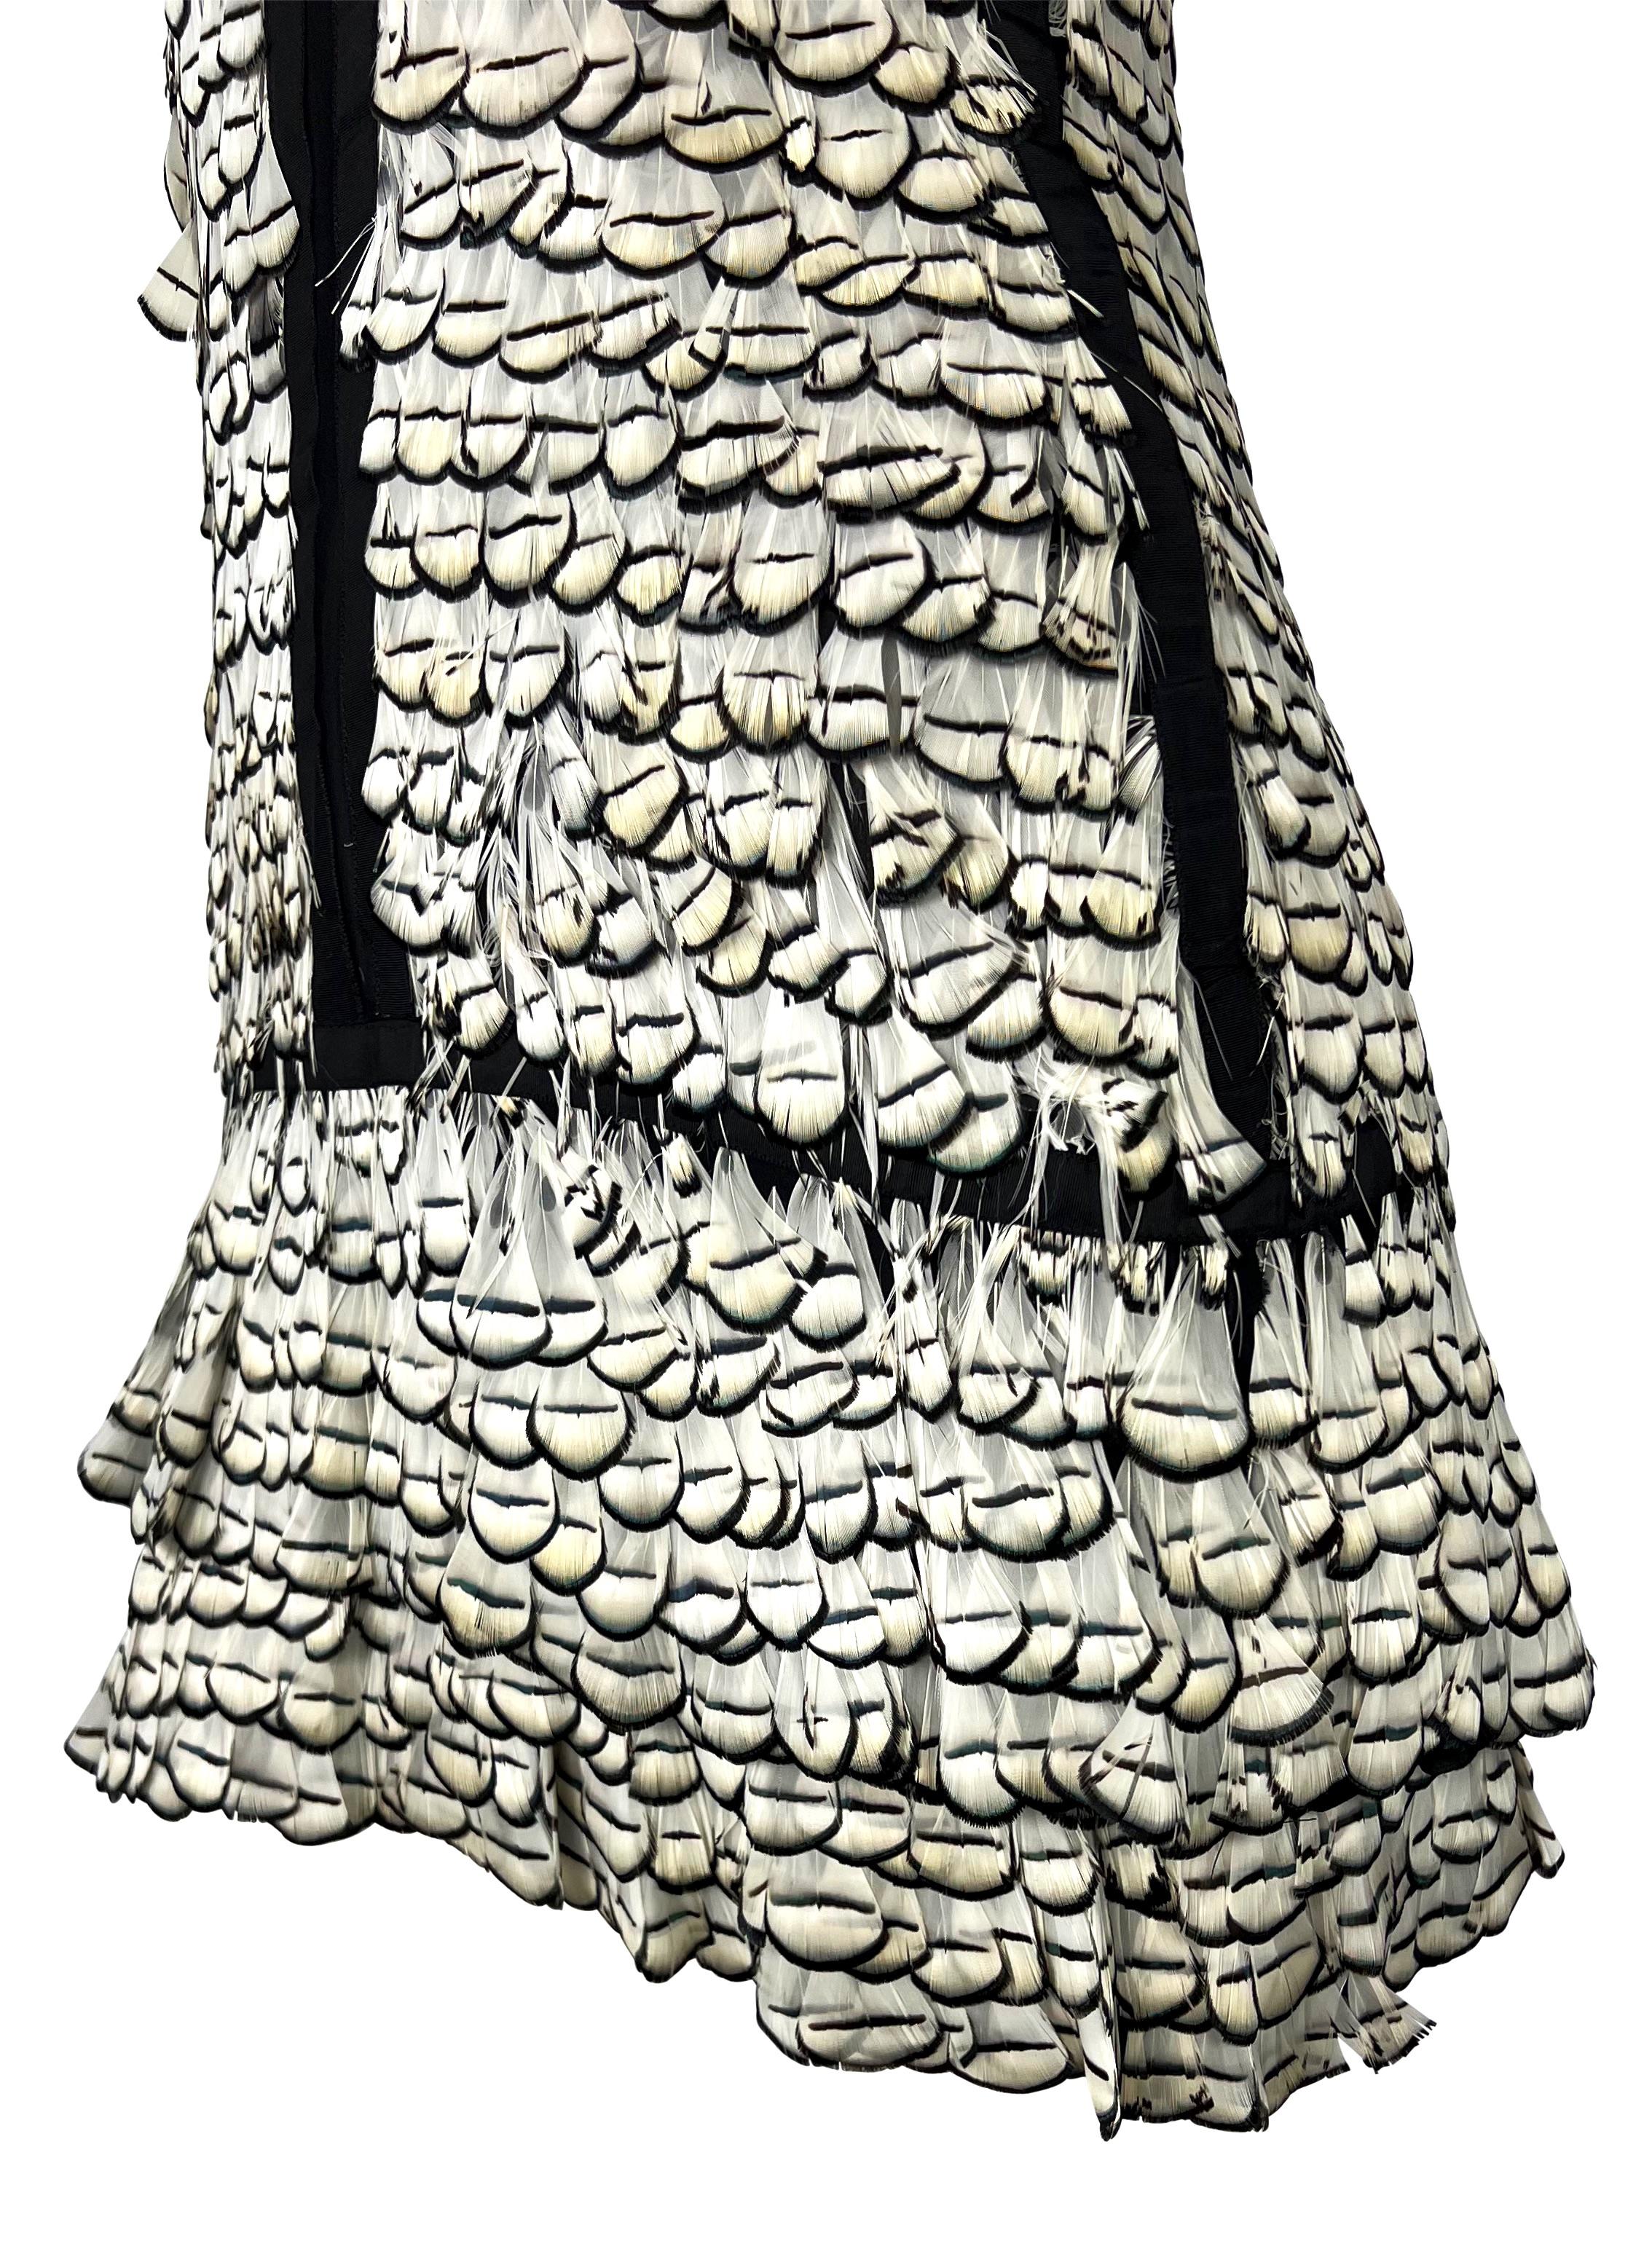 S/S 2003 Gucci by Tom Ford Runway Sheer Silk White Feather Racerback Mini Dress For Sale 4